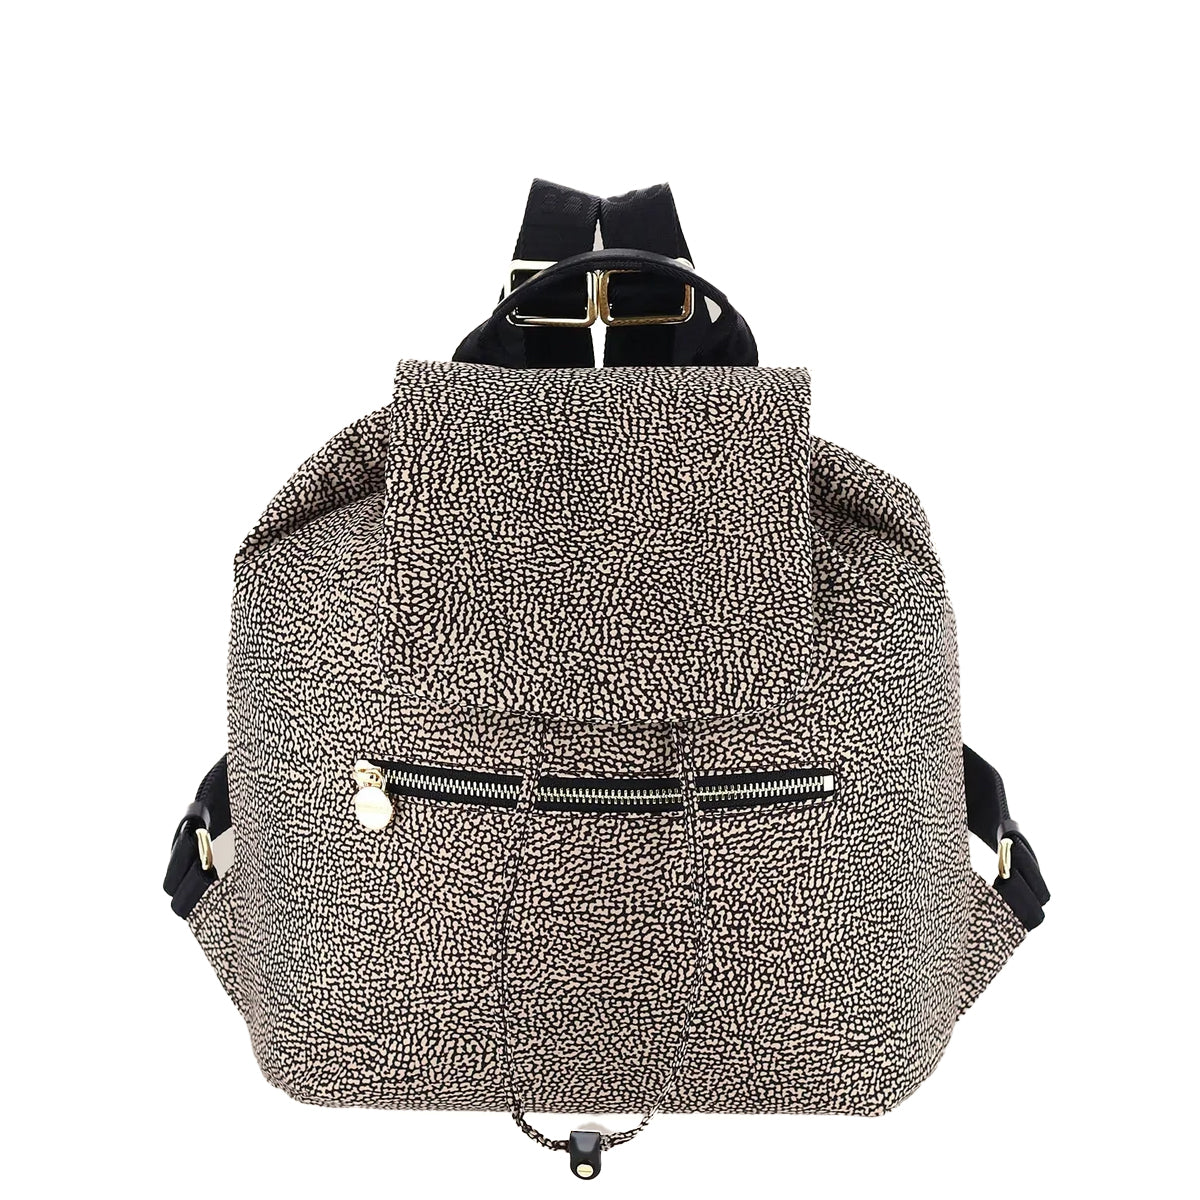 Borbonese - Medium OP Natural Black Backpack made of Recycled Nylon - 934486I15 - OP/NATURALE/NERO